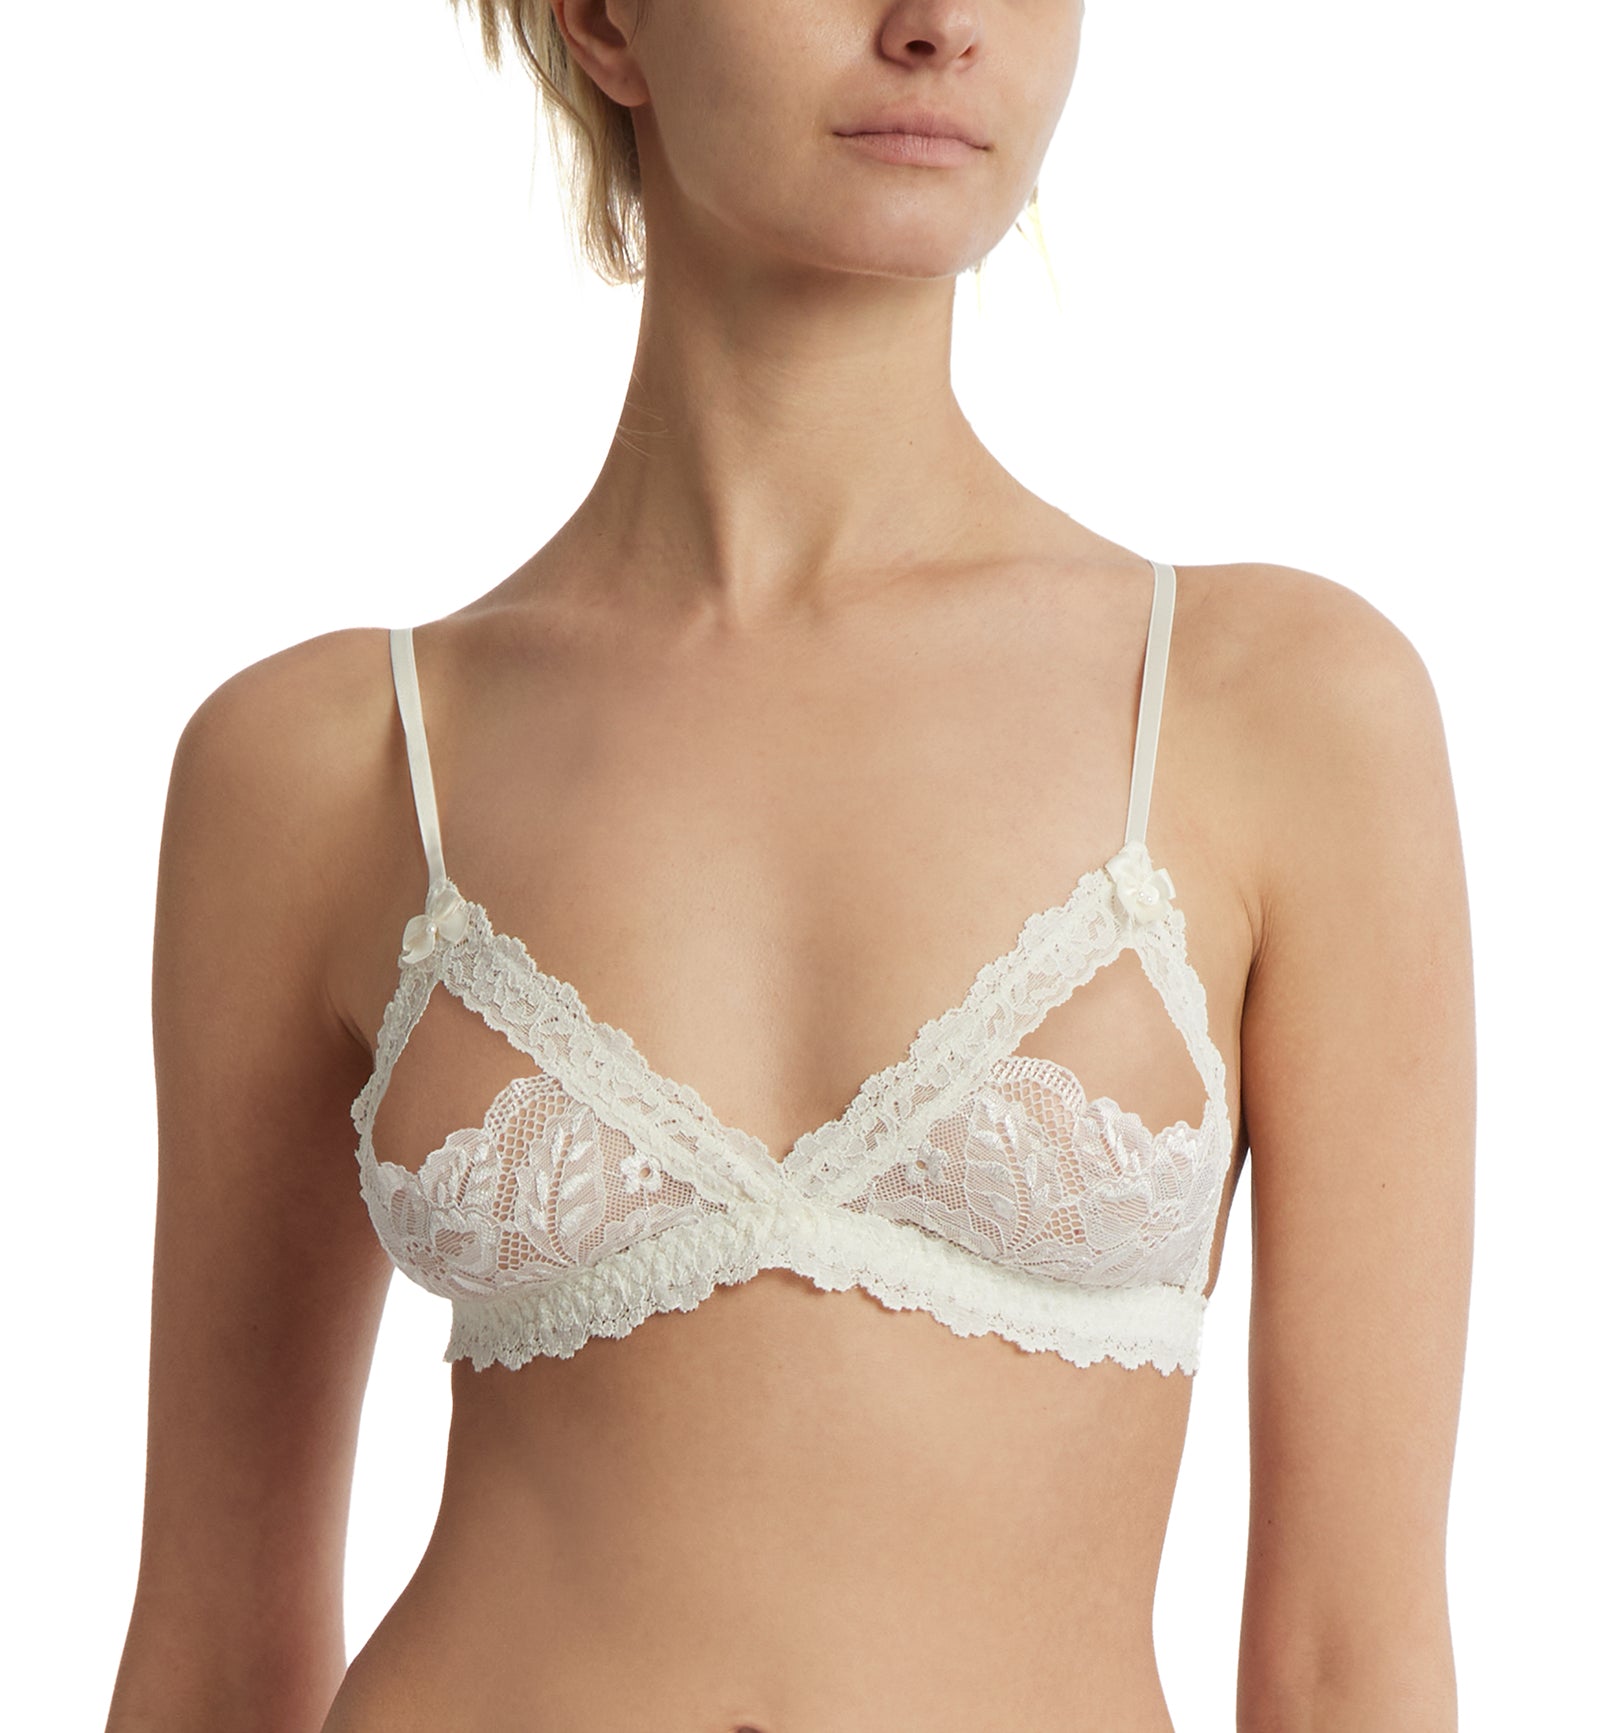 Breakout Bras - Which bra would you marry, date, or dump? You can